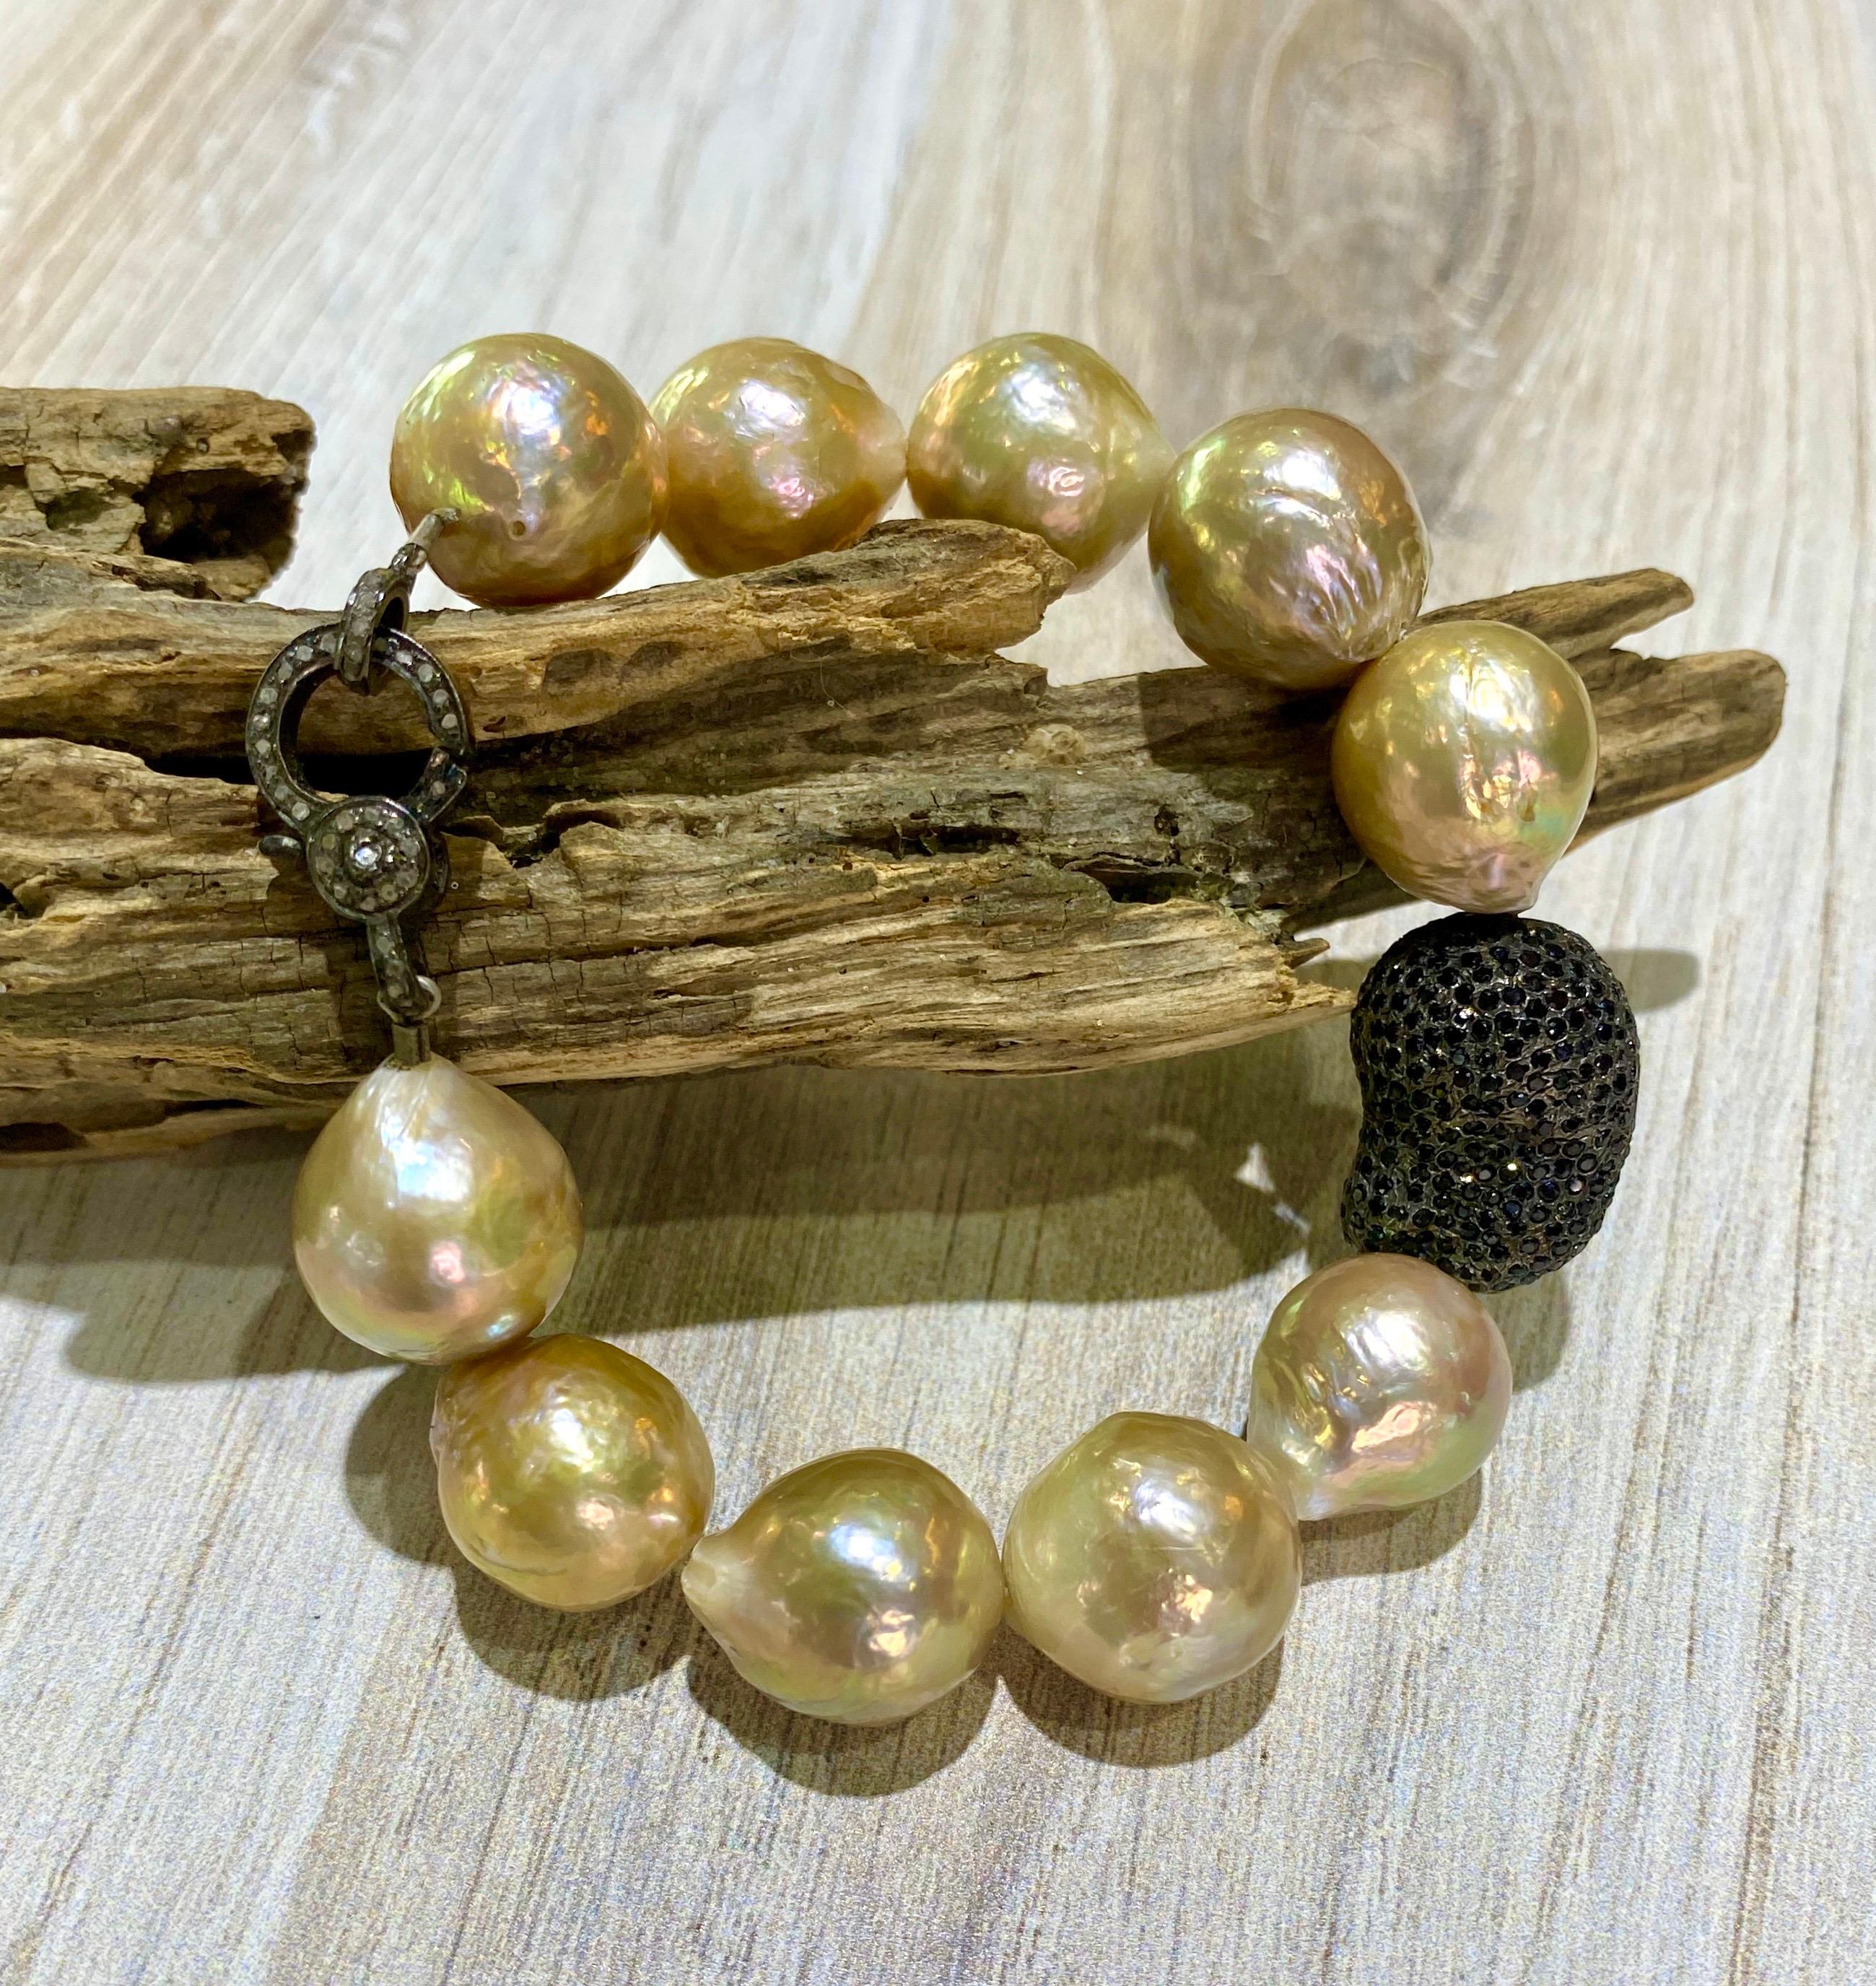 This stunning bracelet is made of naturally gold Edison pearls with an organic, baroque shape.  The pearls are large, 14mm and have a metallic shiny luster.  A big, sparkling black spinel bead is centered and is finished with a champagne diamond